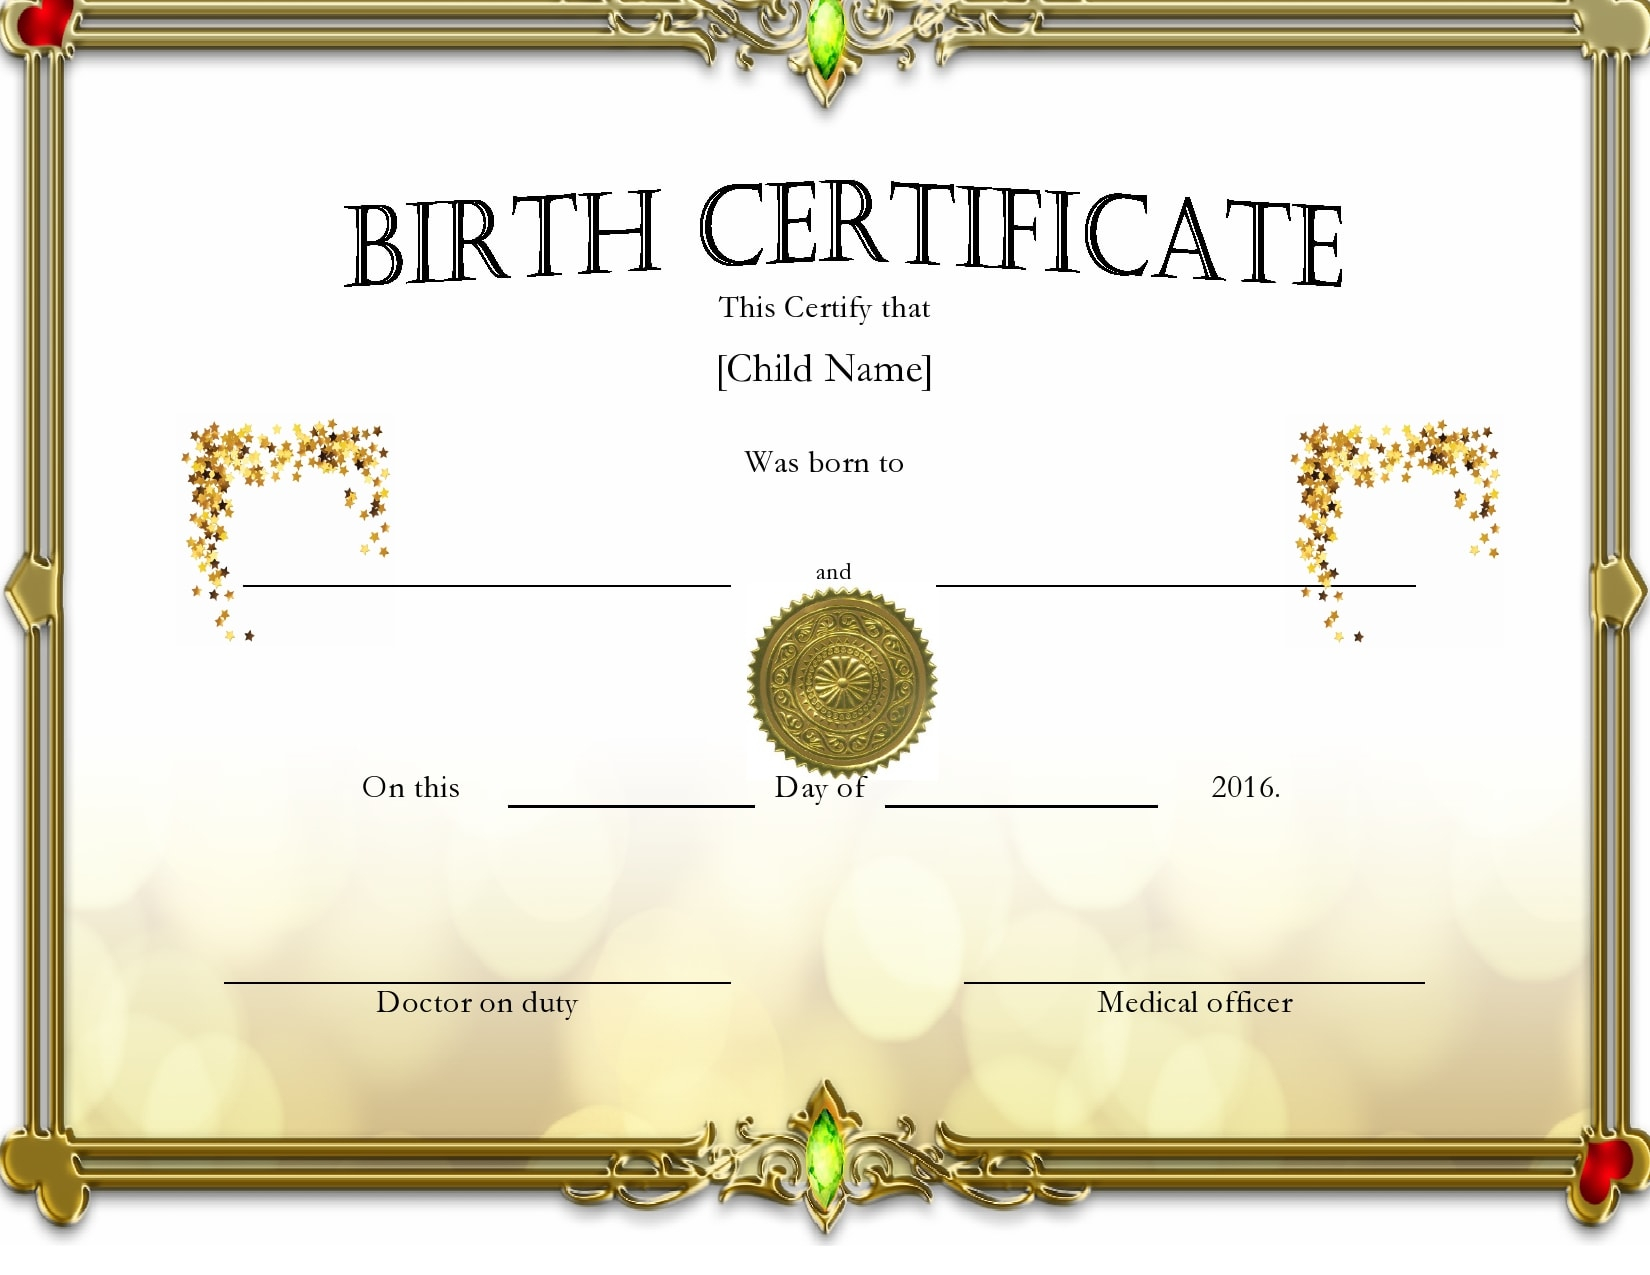 10 Blank Birth Certificate Templates (& Examples) – PrintableTemplates Regarding Birth Certificate Template Uk